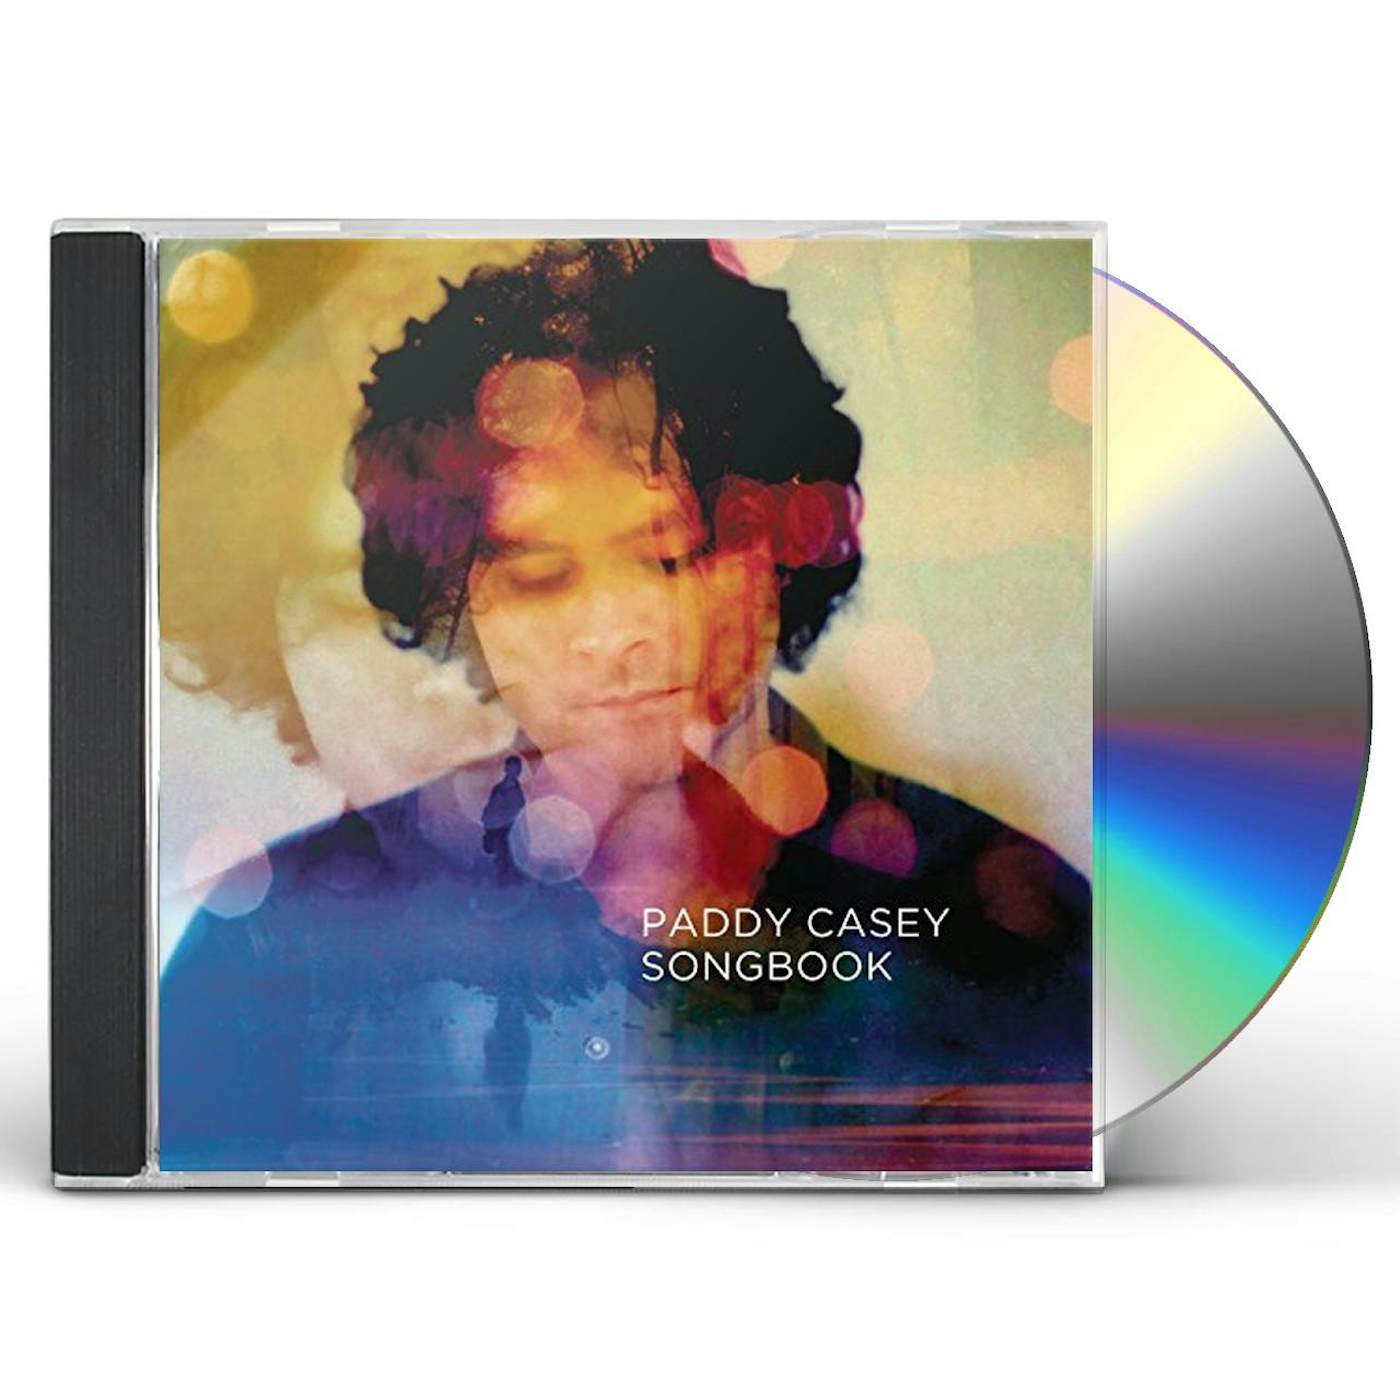 SONGBOOK: THE BEST OF PADDY CASEY CD